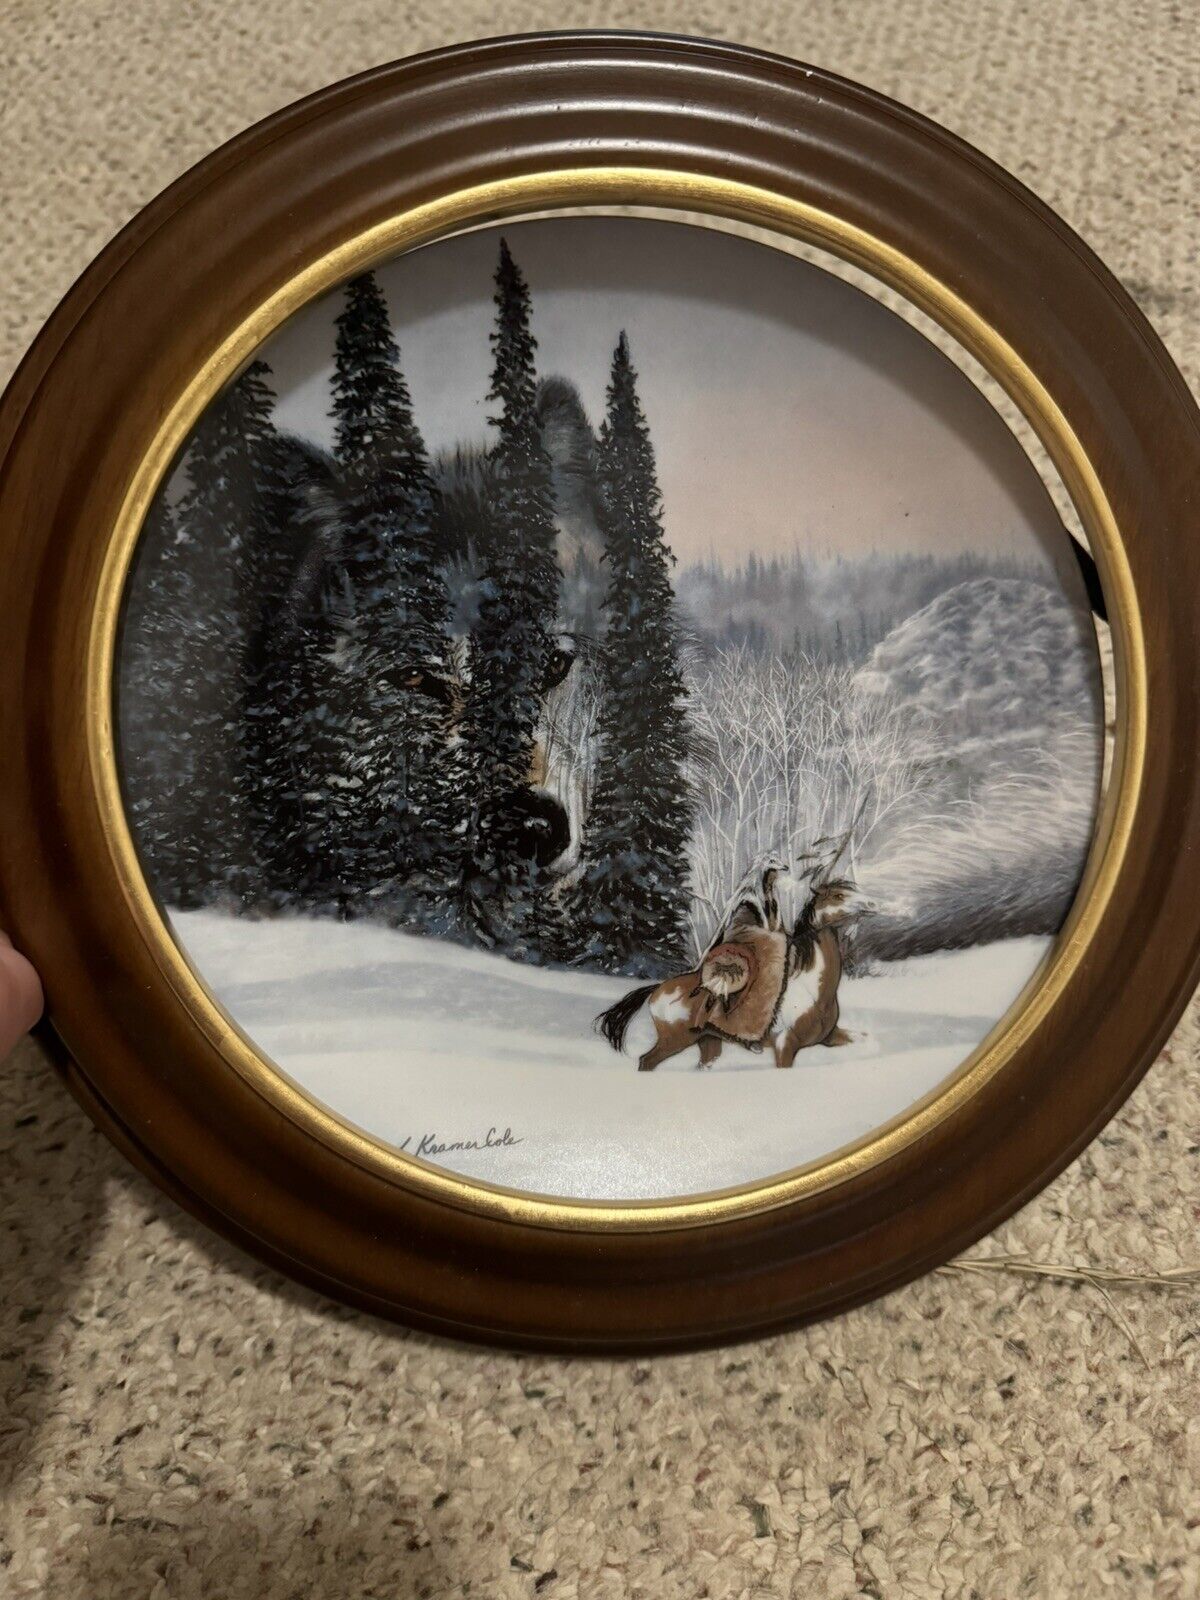 Wolf Ridge Collector Plate in frame 1992 by Julie Kramer Cole